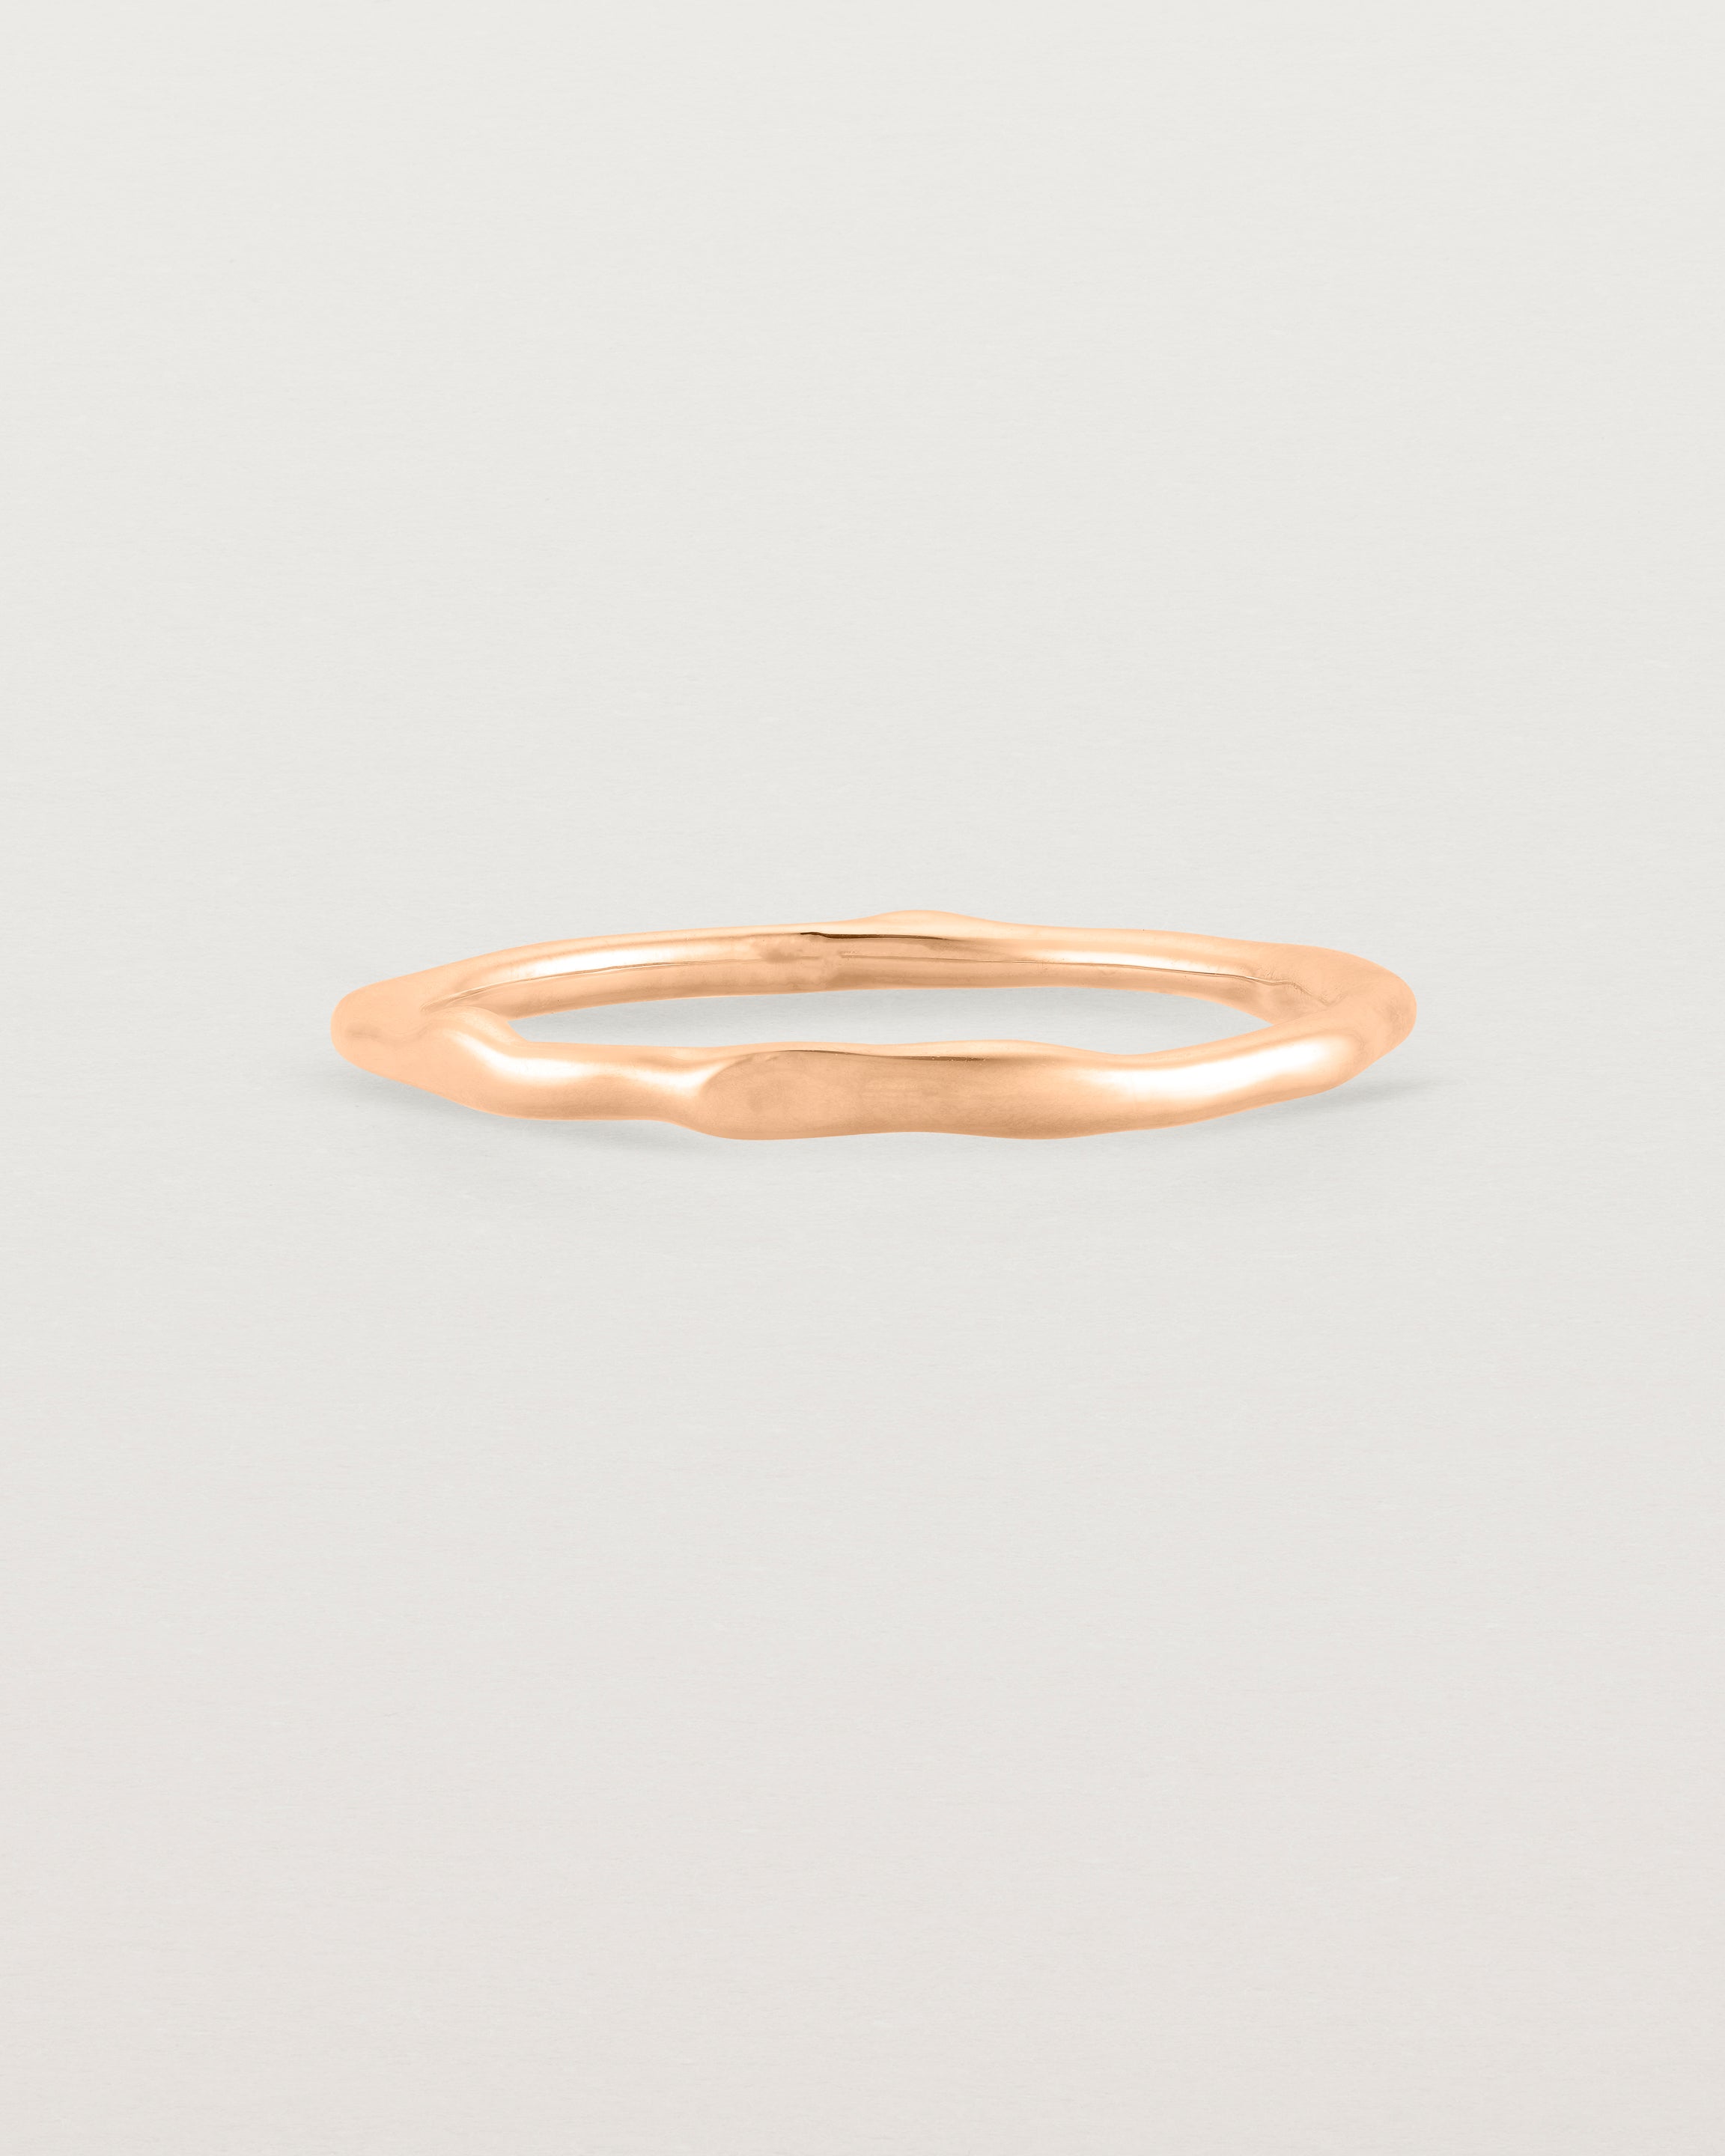 The Organic Stacking Ring in Rose Gold.